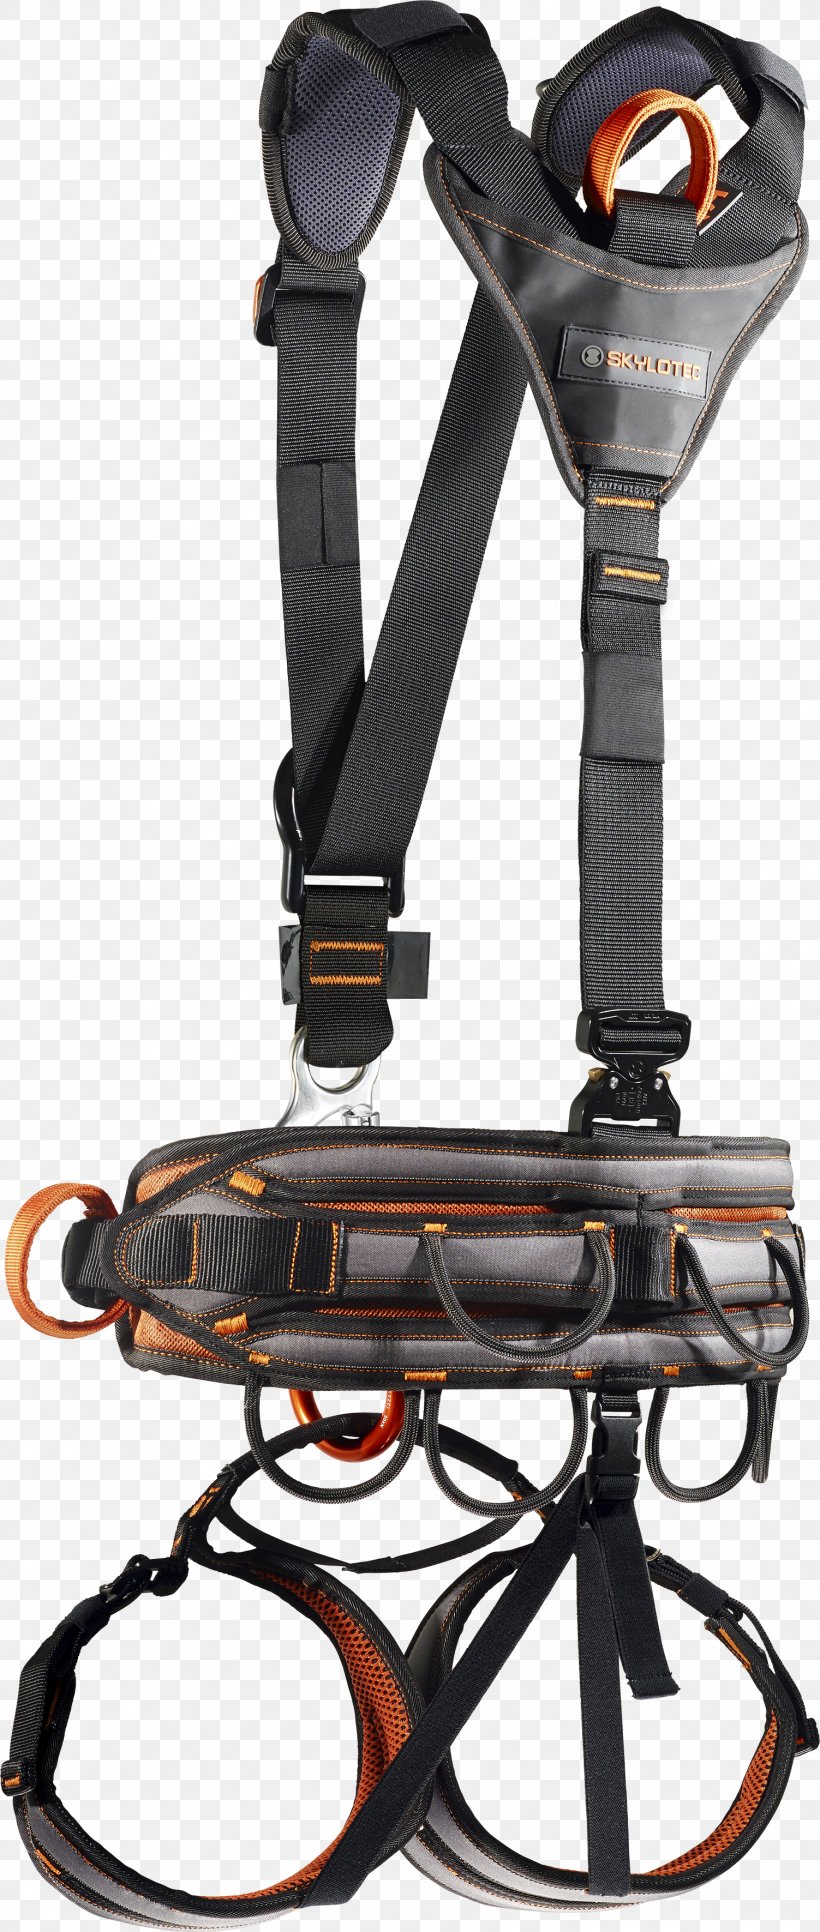 Climbing Harnesses SKYLOTEC Personal Protective Equipment Ignite Proton, PNG, 1503x3543px, Climbing Harnesses, Belt, Climbing, Climbing Harness, Enstandard Download Free